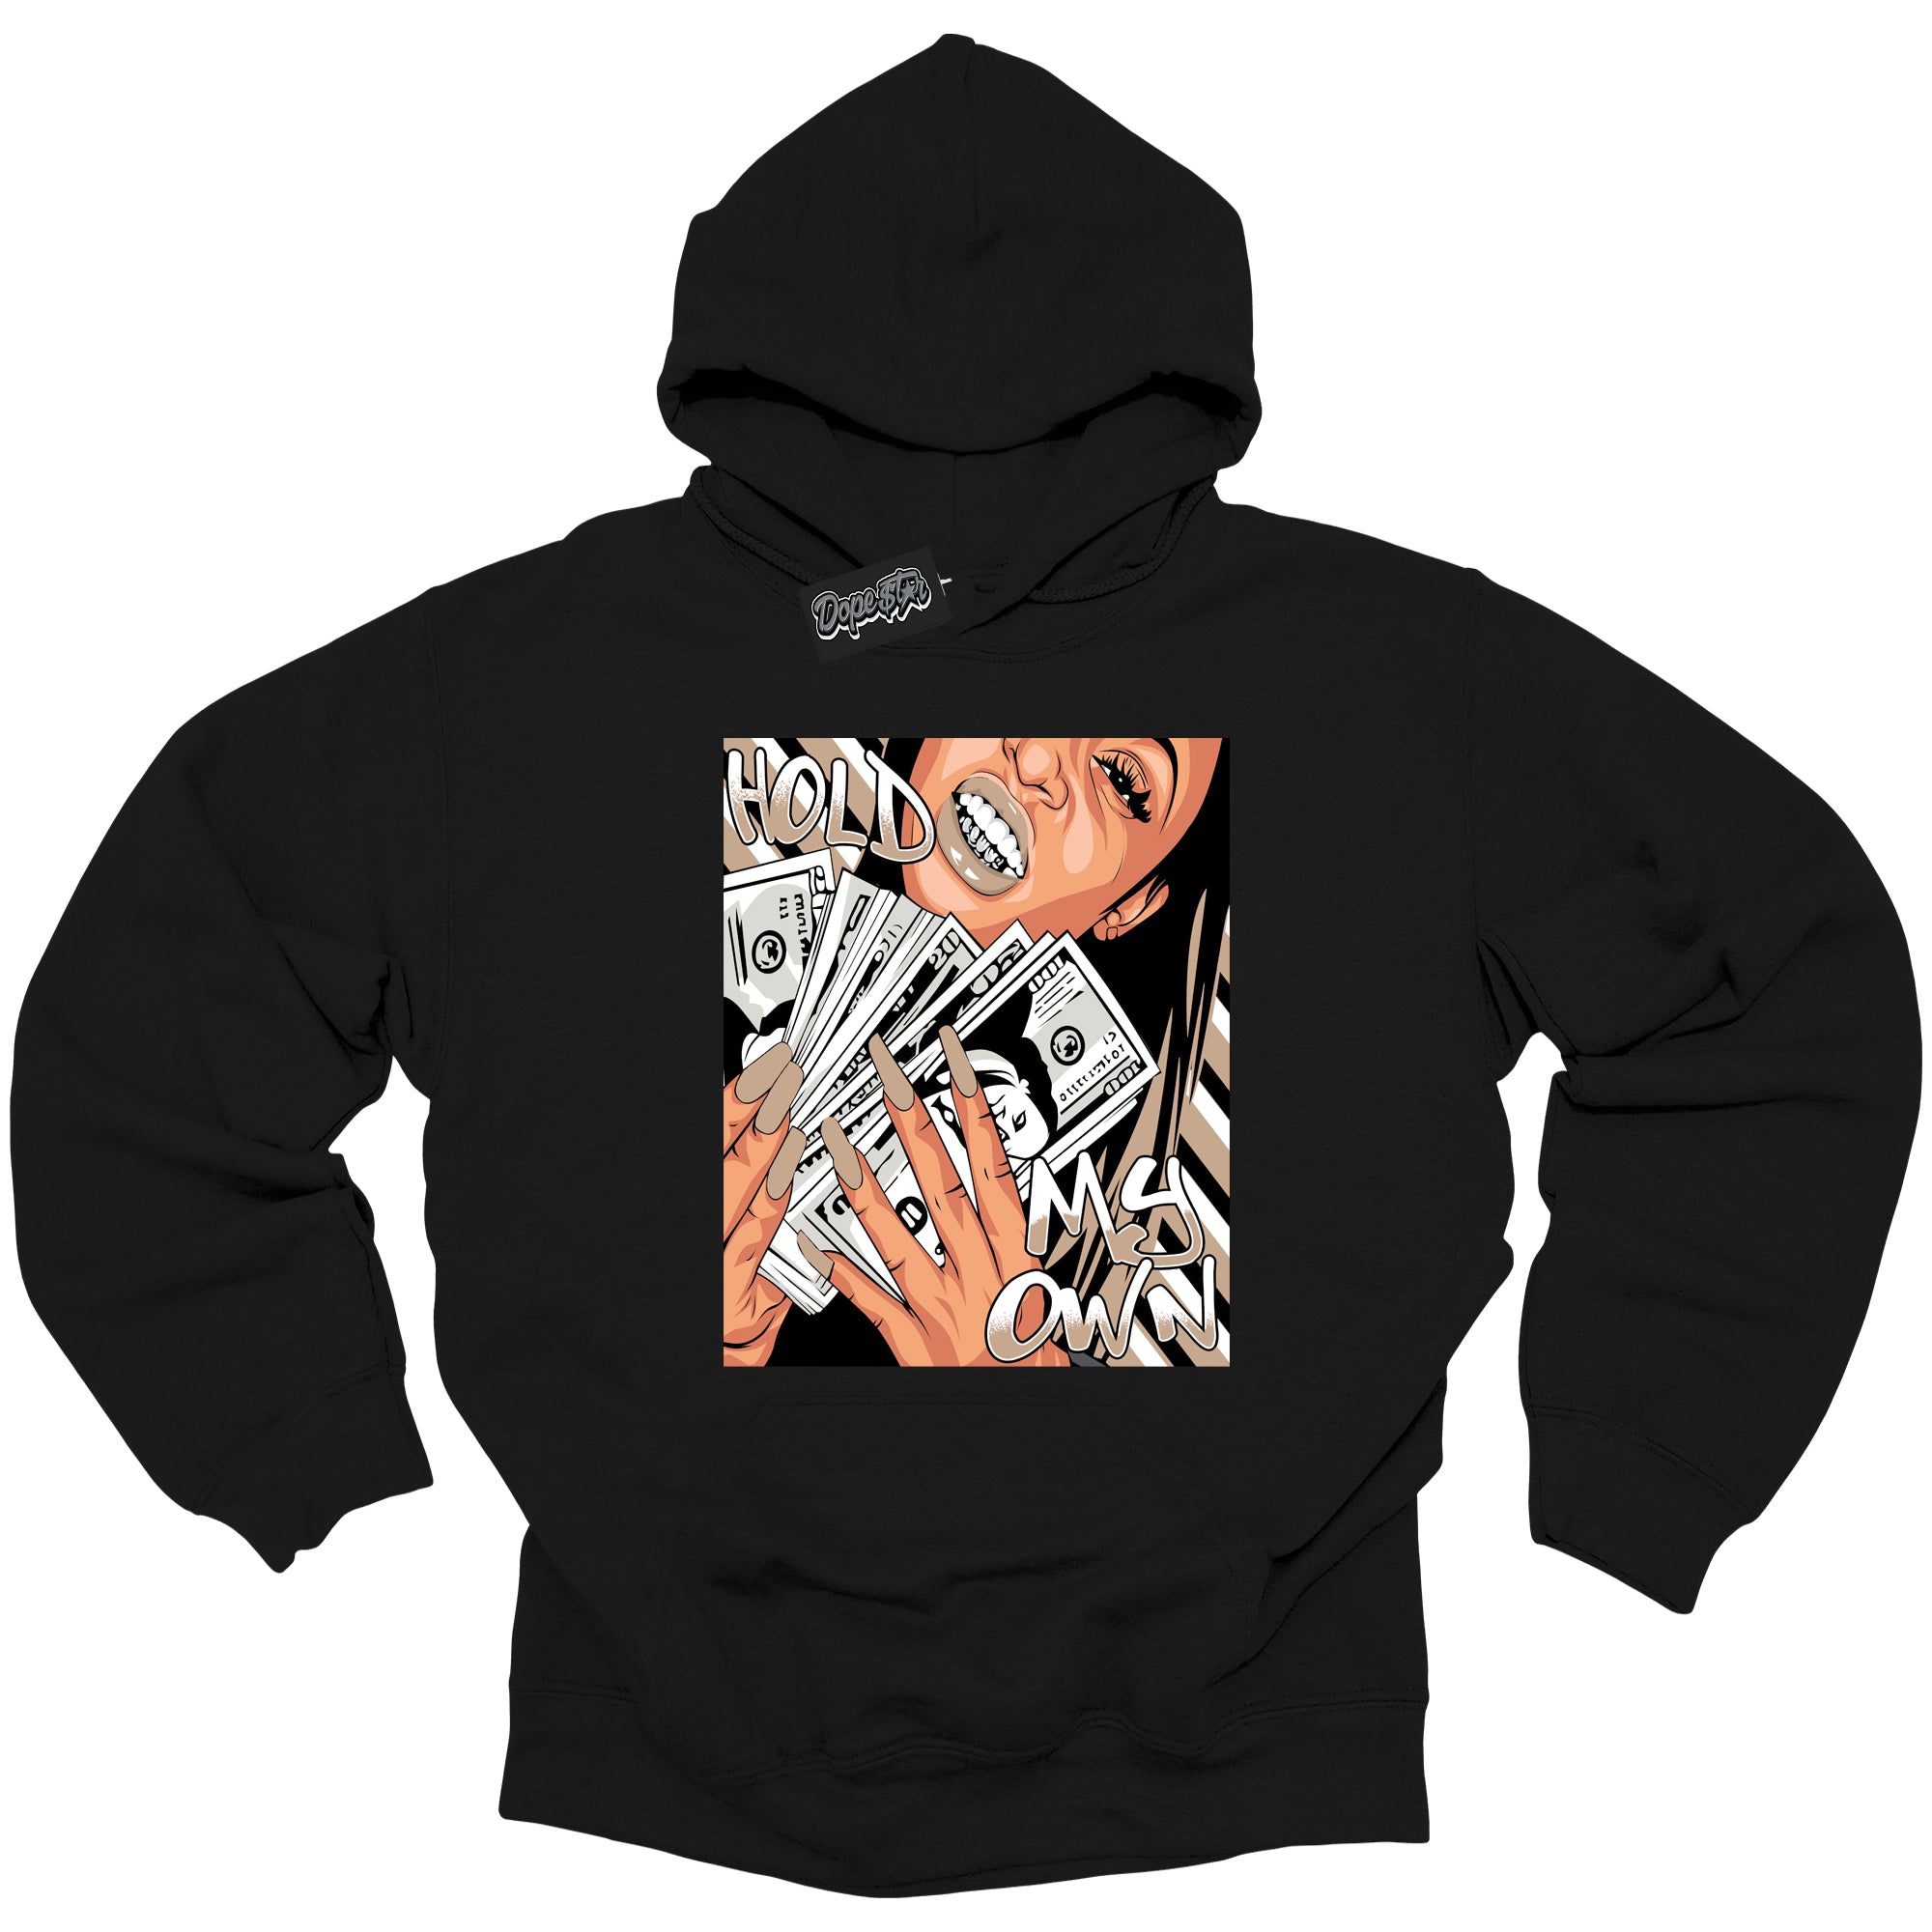 Cool Black Graphic Dope`Star Hoodie with “ Hold My Own “ print, that perfectly matches Palomino 1s sneakers